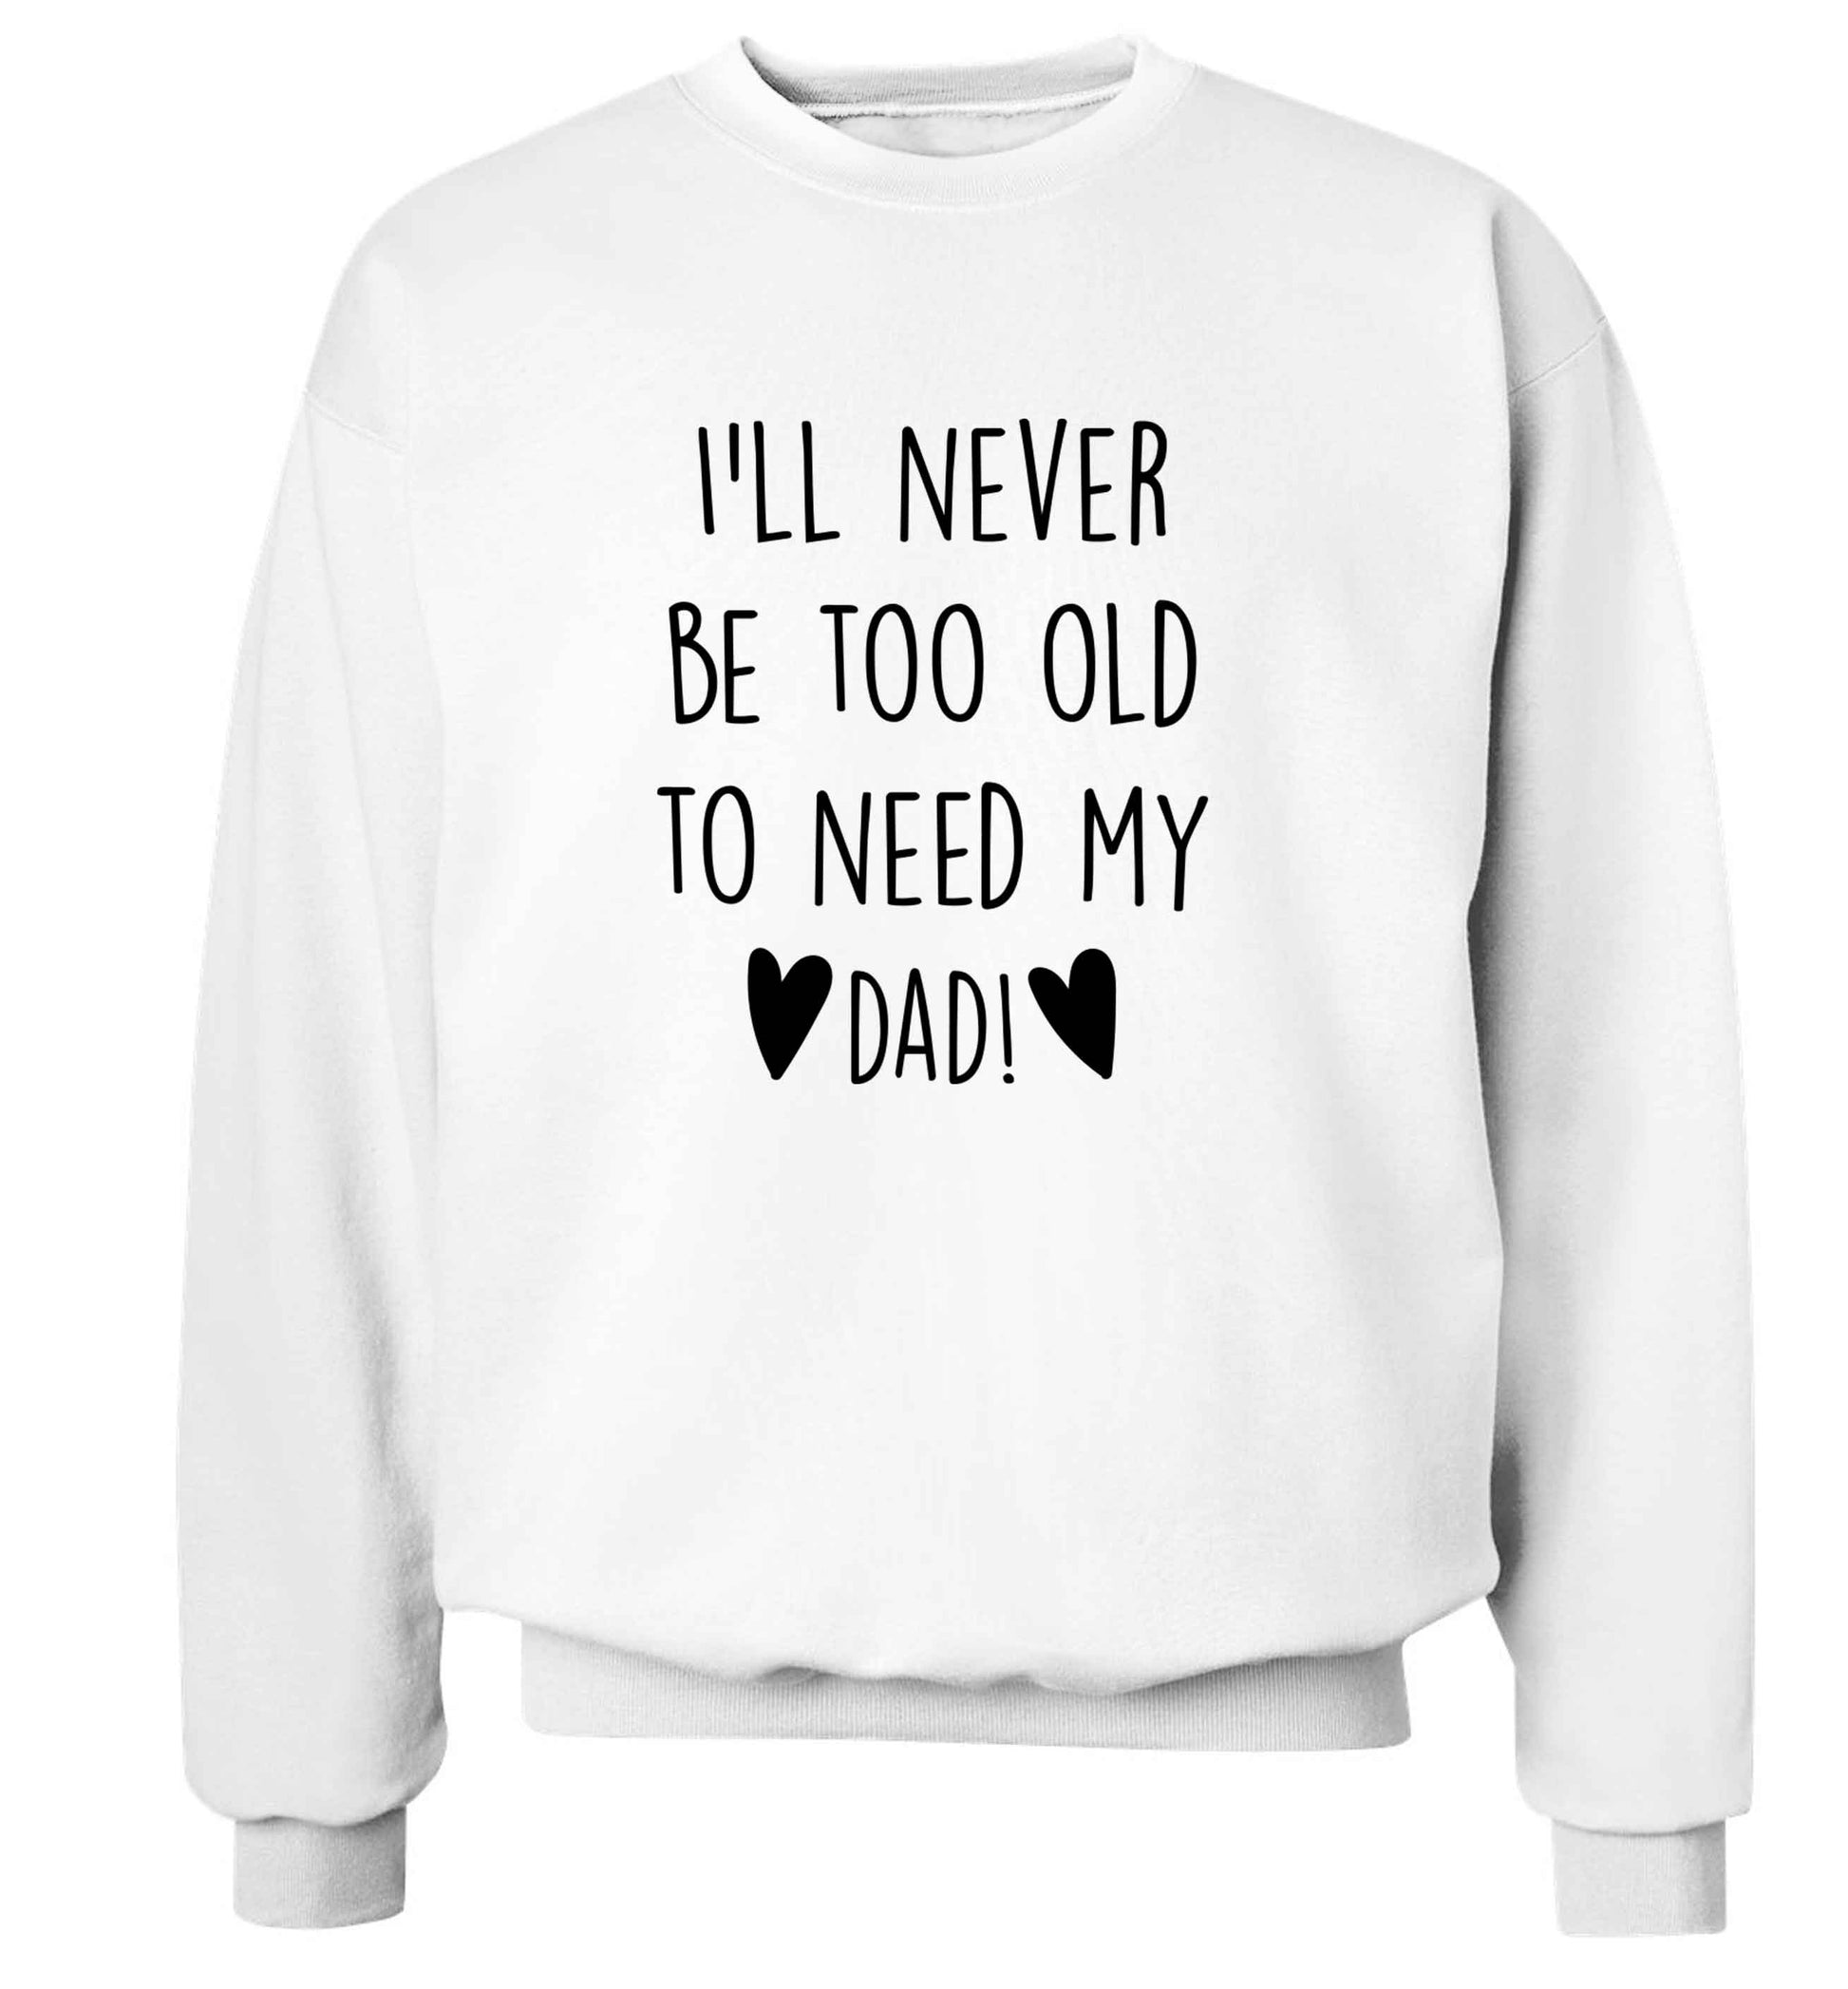 I'll never be too old to need my dad adult's unisex white sweater 2XL